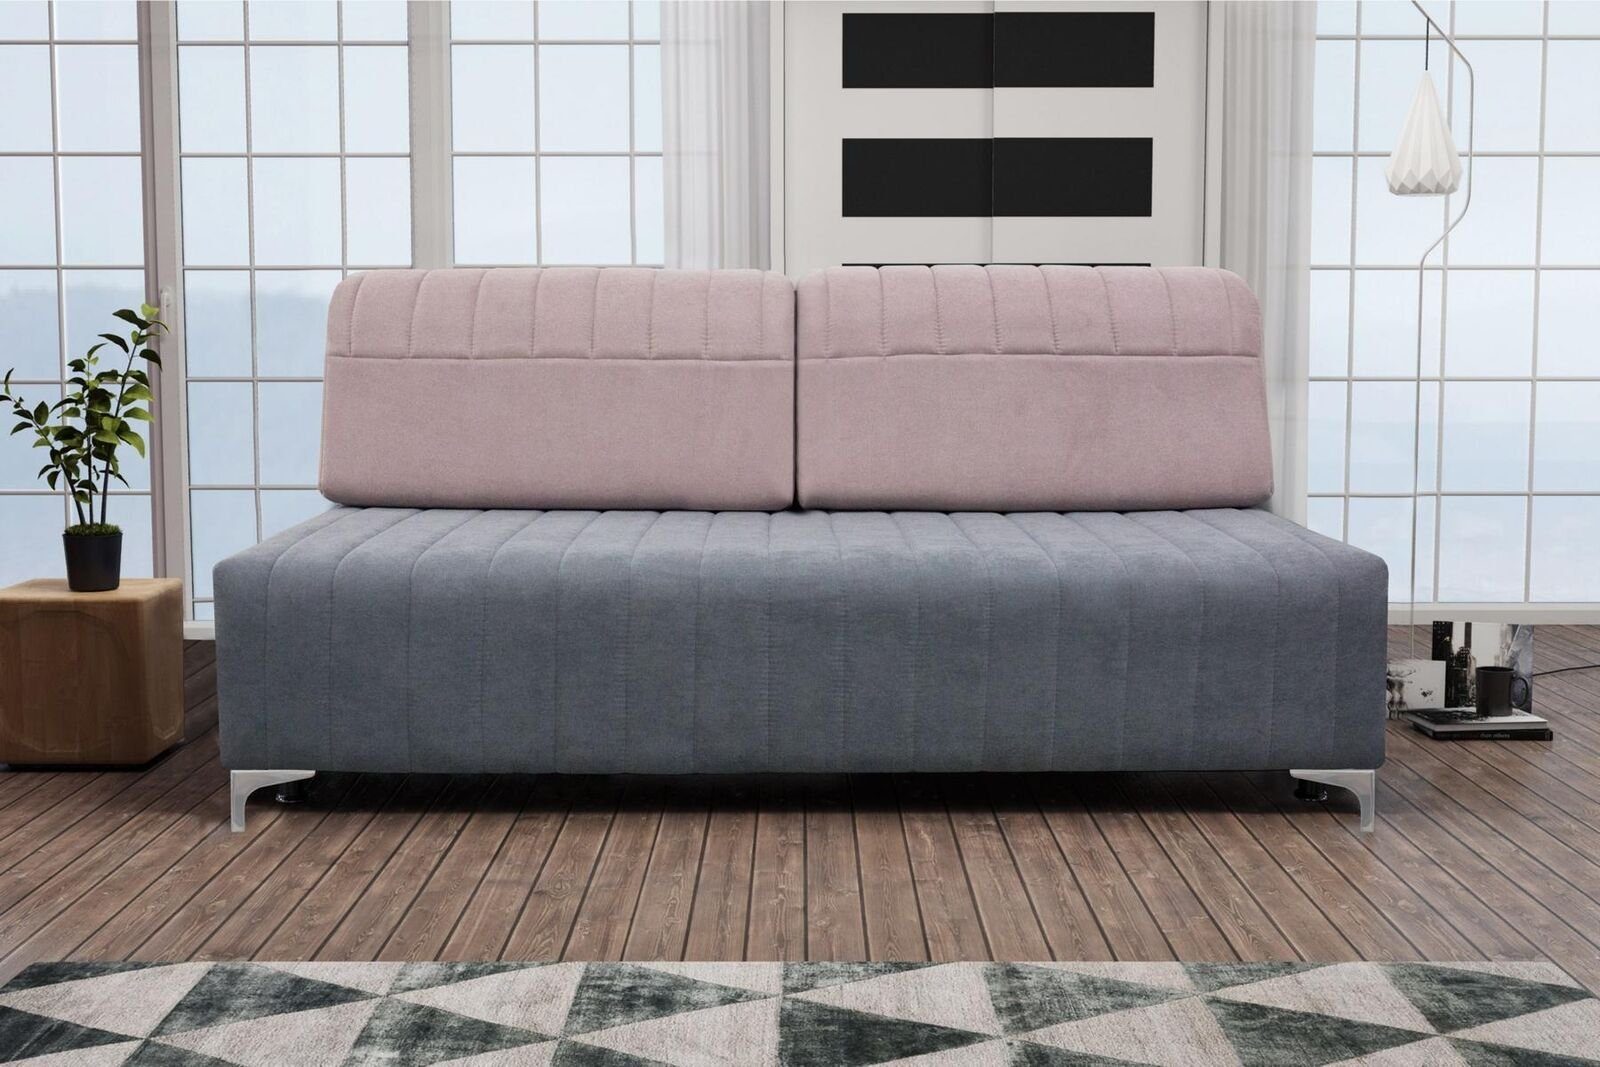 JVmoebel Sofa Design Lounge Stoff Couch Sofa 2 Sitzer Polster Sofa, Made in Europe